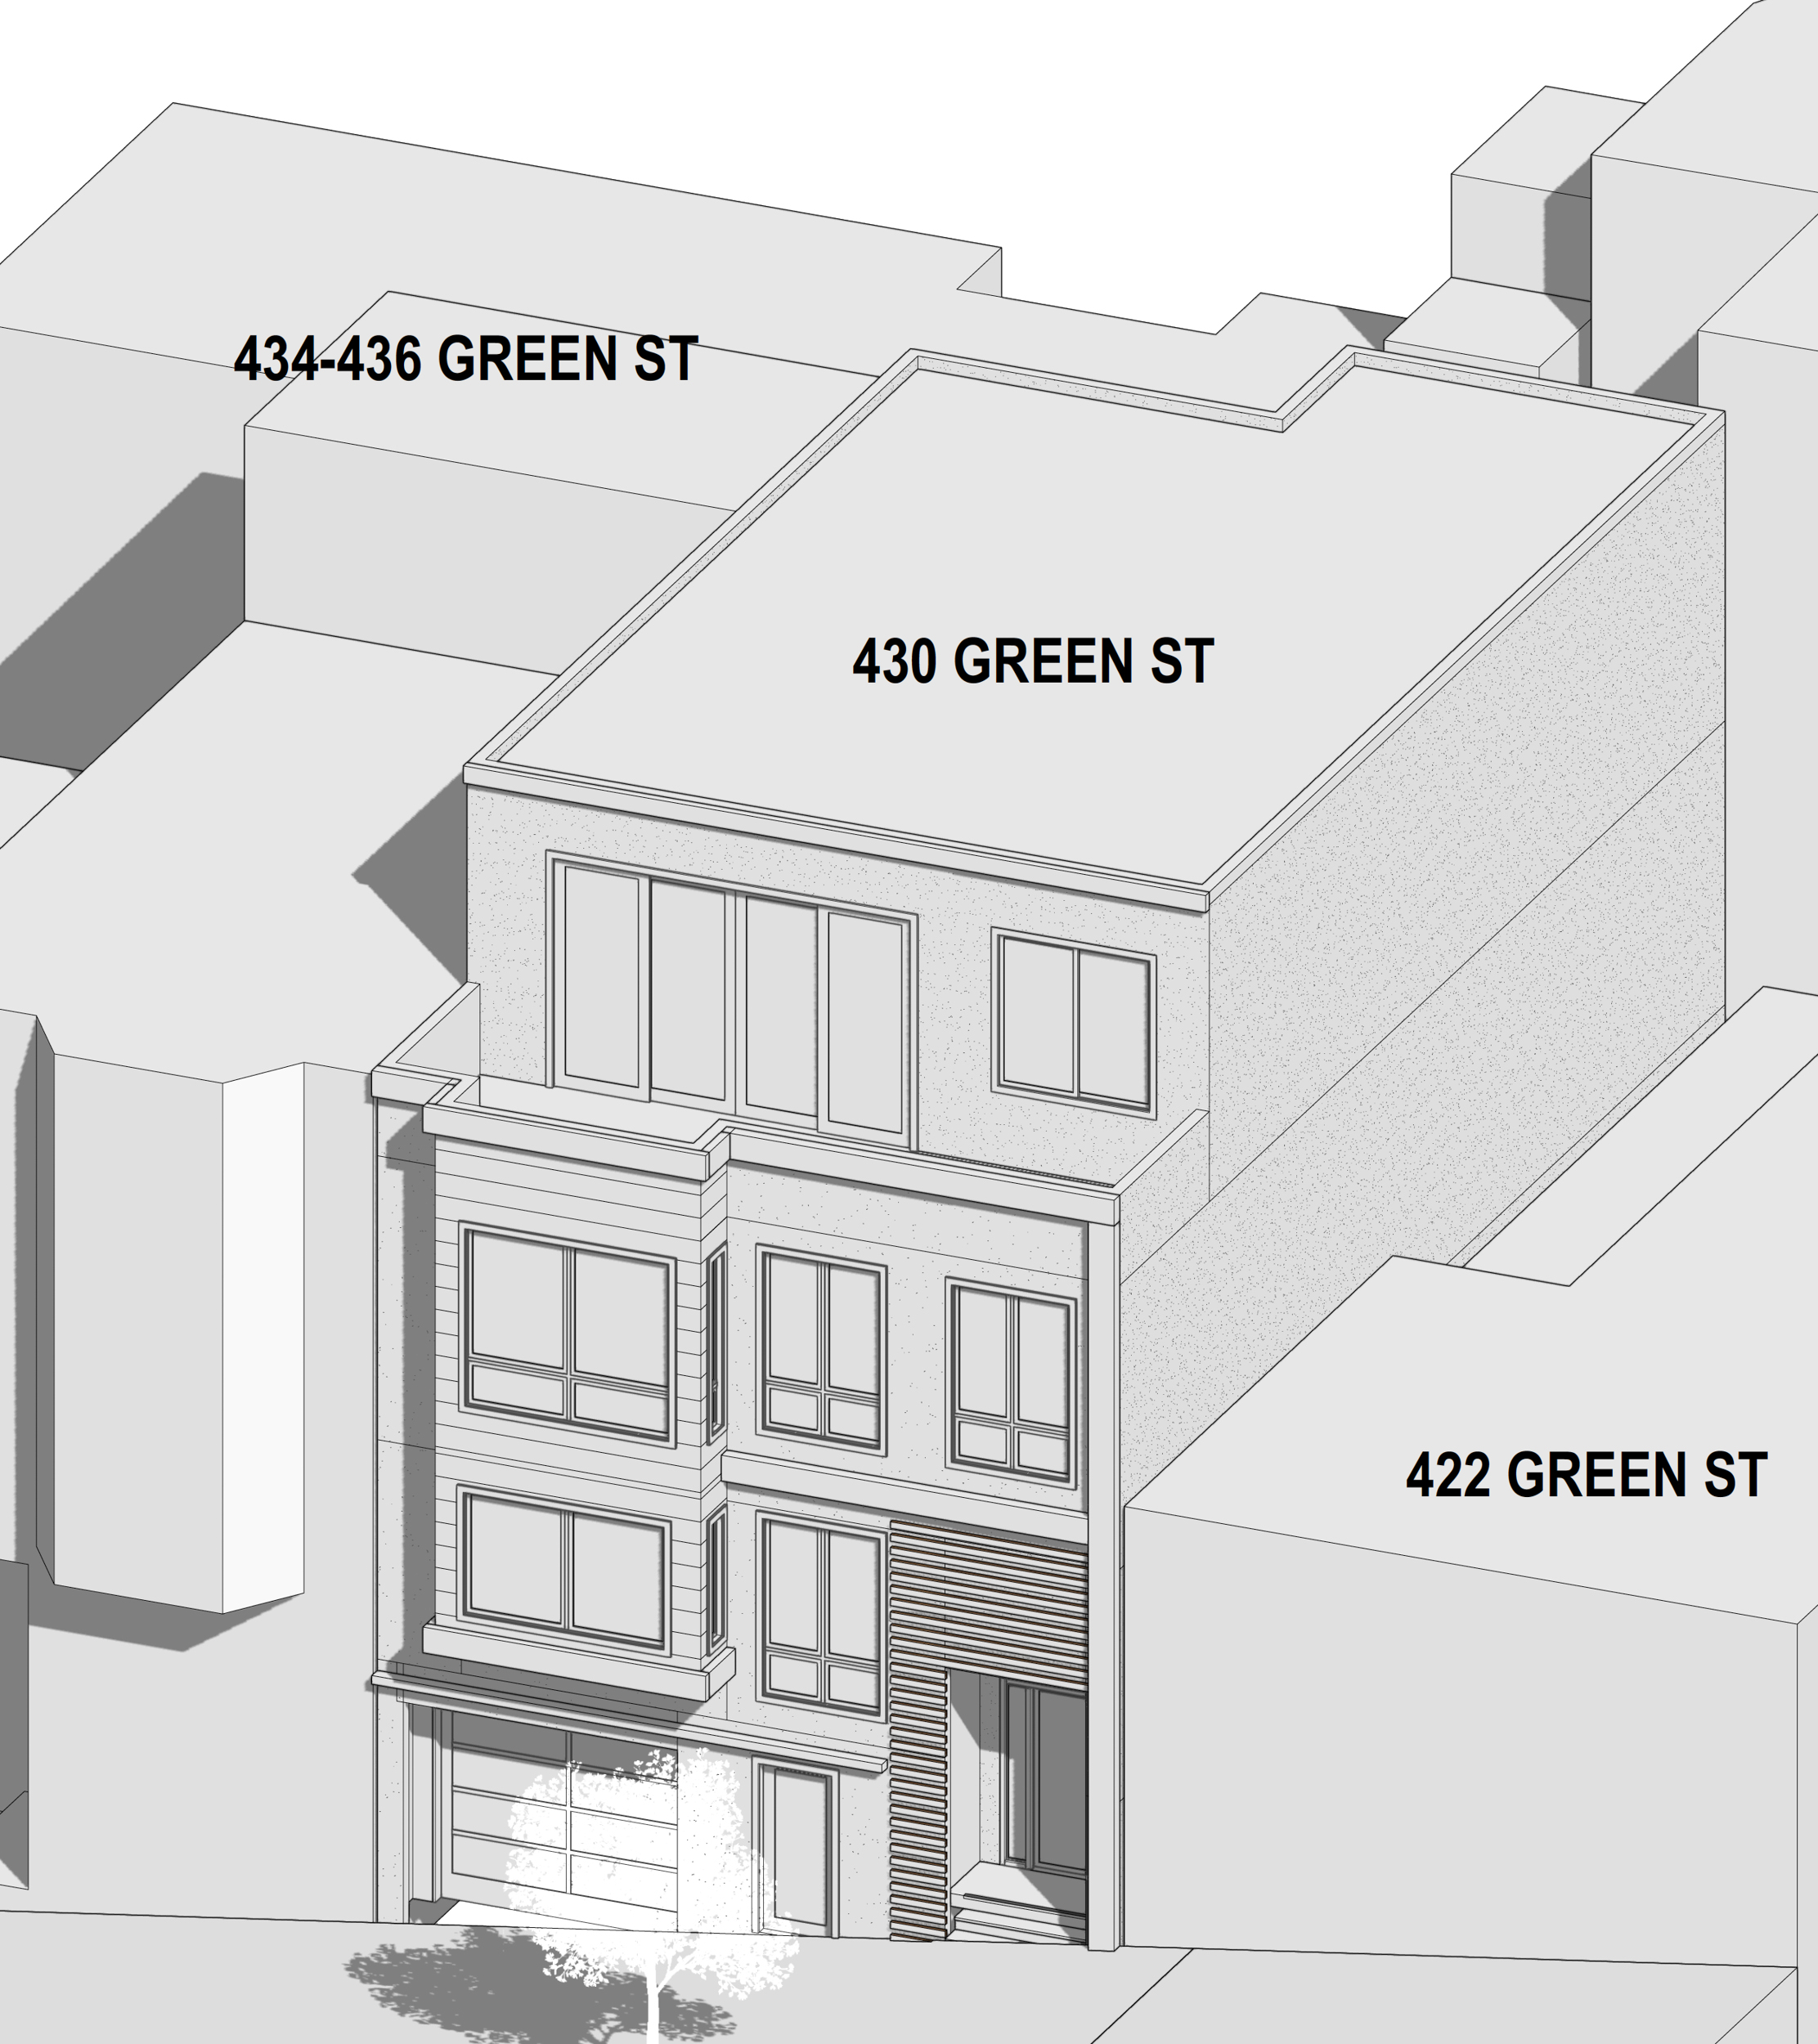 430 Green Street front view, illustration by SIA Consulting